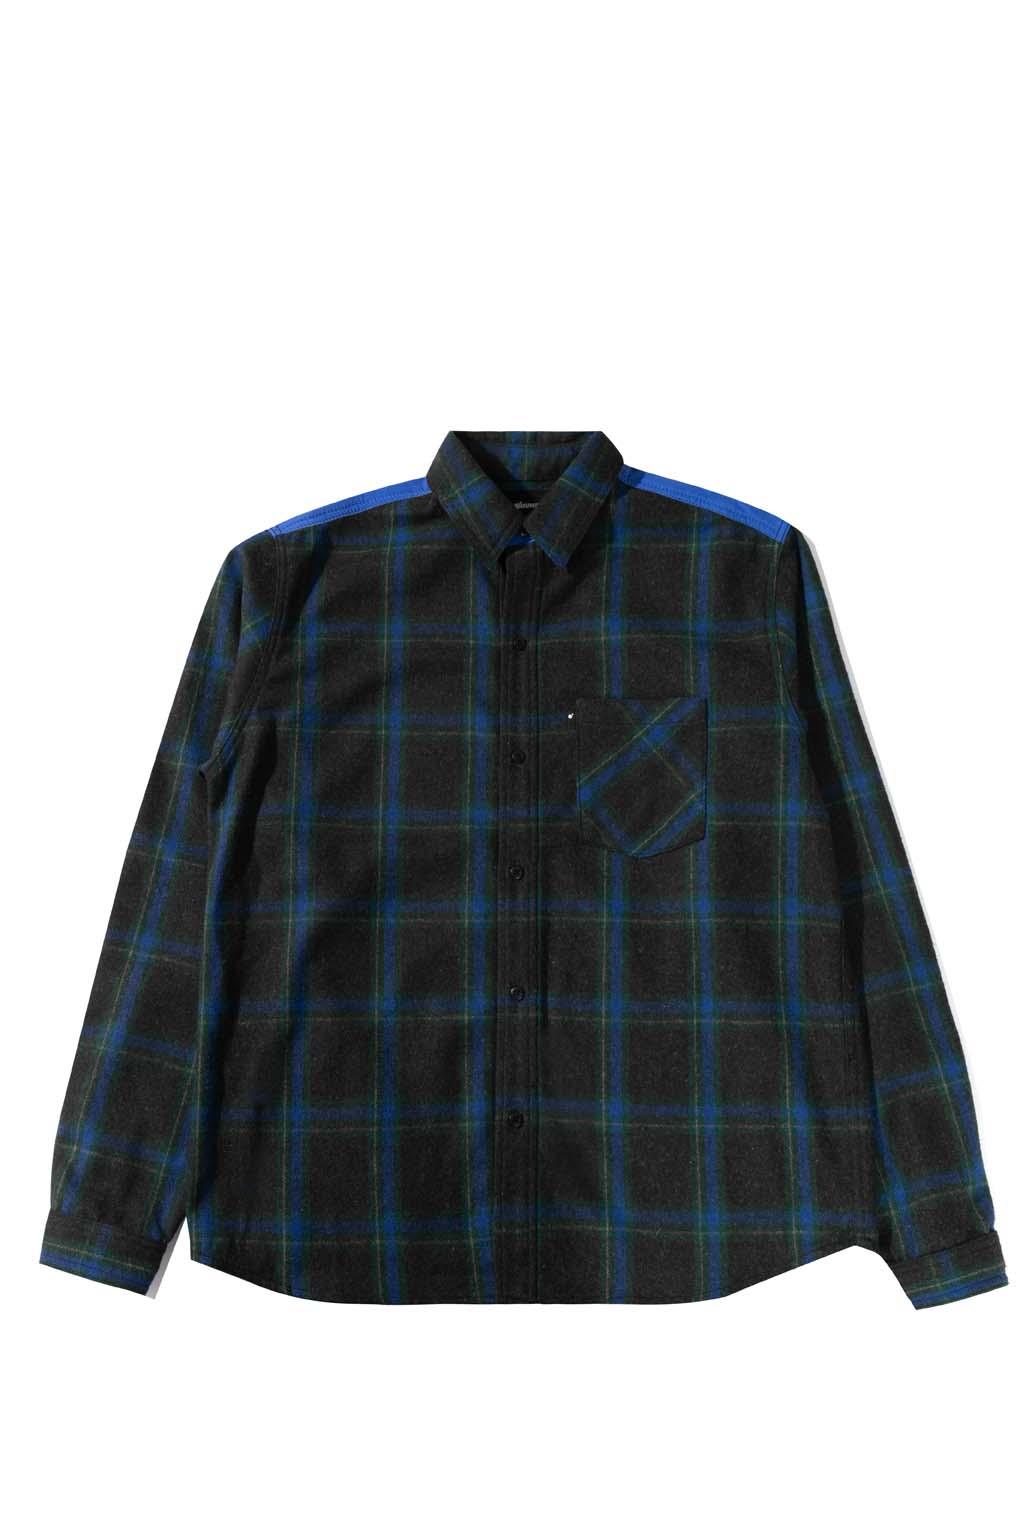 Image of Sequoia Button-Up